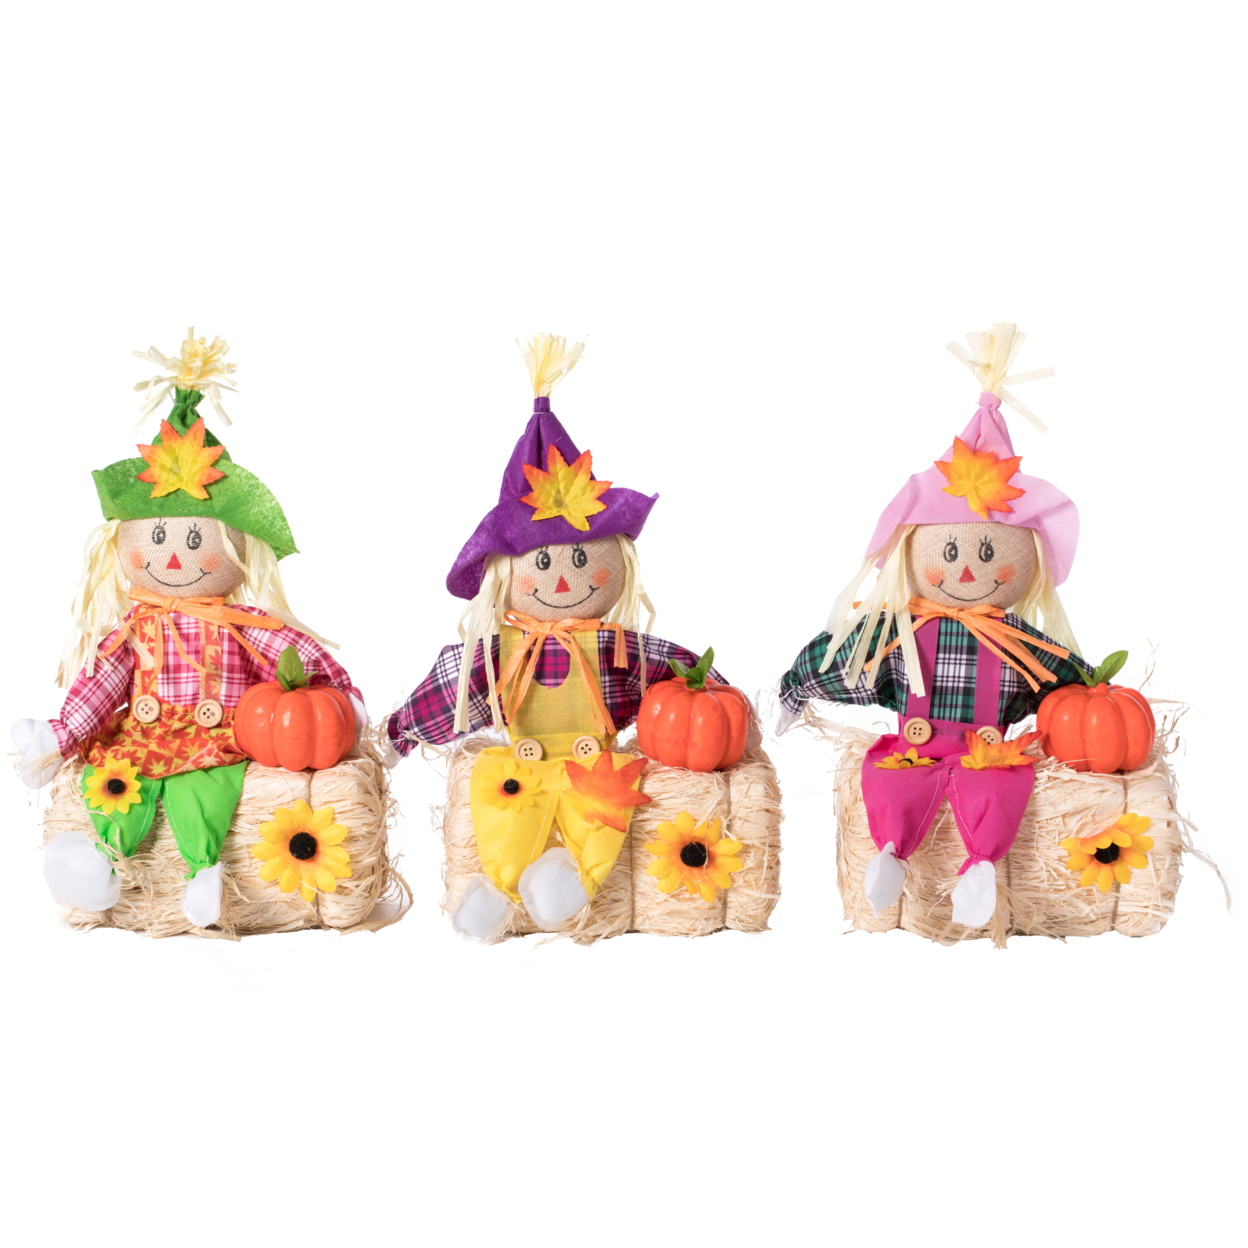 Outdoor Fall Decor Halloween Scarecrow For Garden Ornament Sitting On Hay Bale, Straw Multicolor, Set Of 3, 16 In.